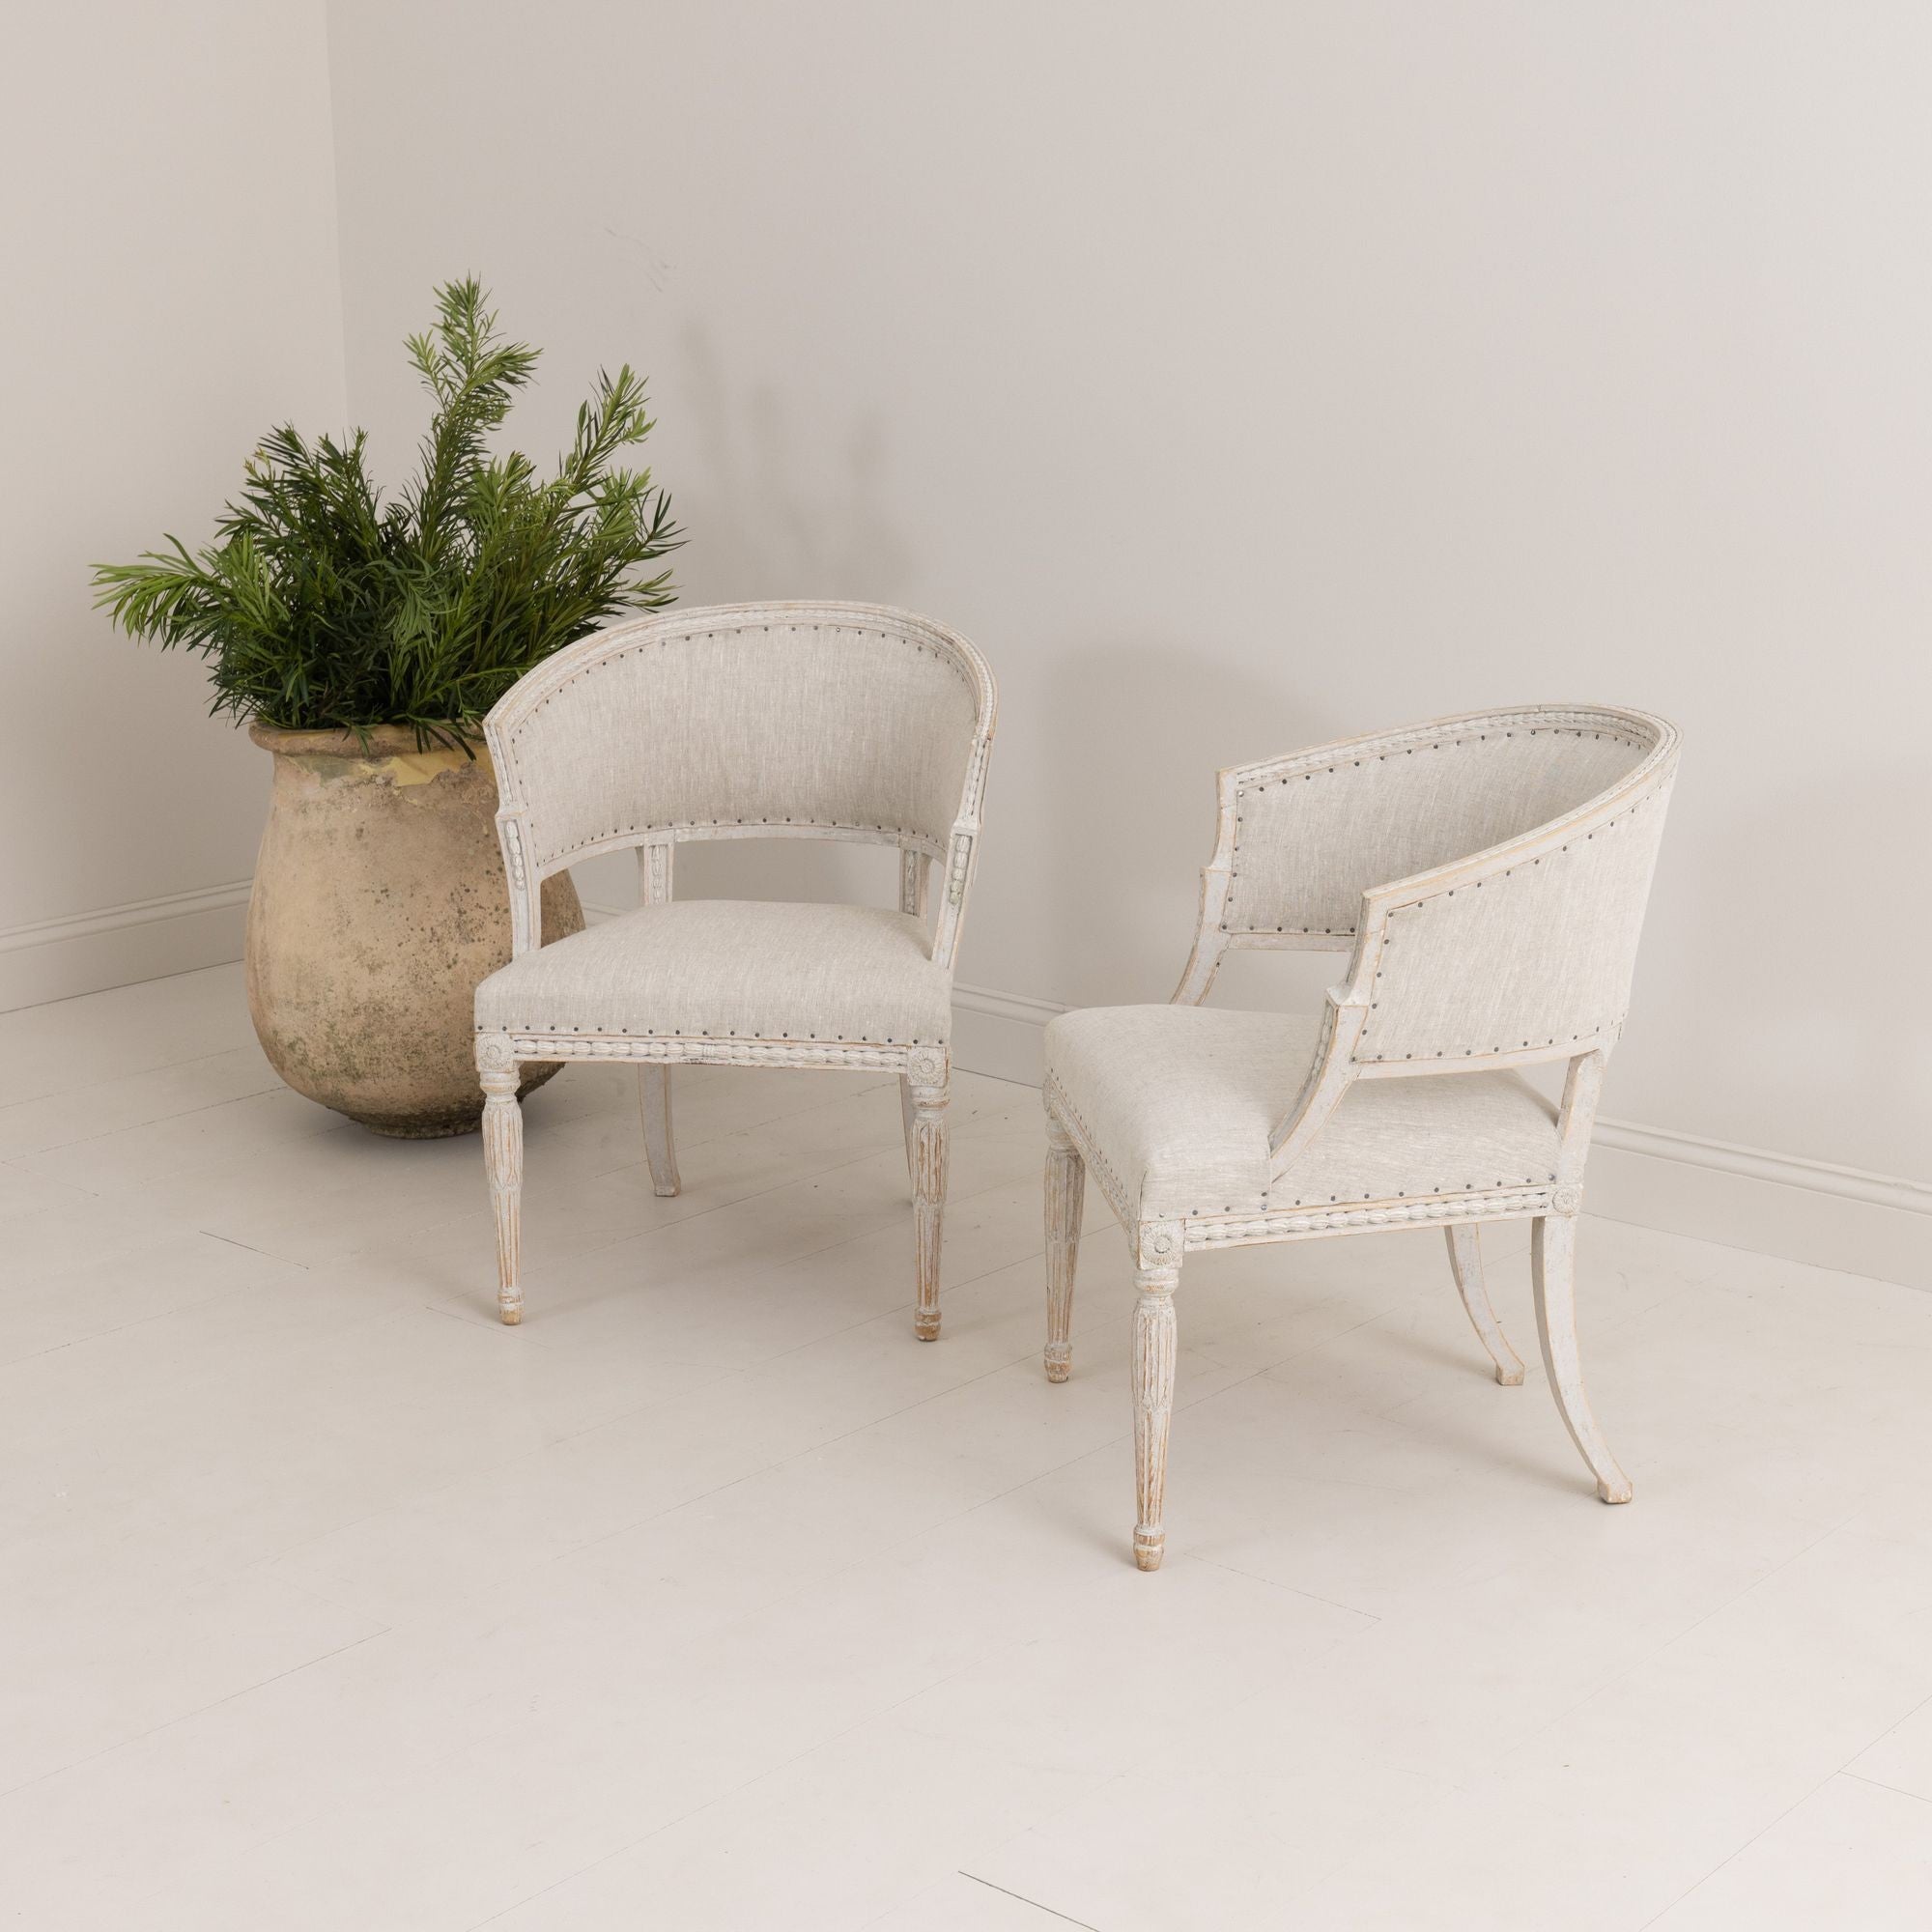 A pair of Swedish chairs with classic sulla barrel backs in the Gustavian style with plaster decorative details, newly upholstered in linen. Beautifully carved bell flowers around the backs of the chairs and on the seat frame, rosettes on the corner